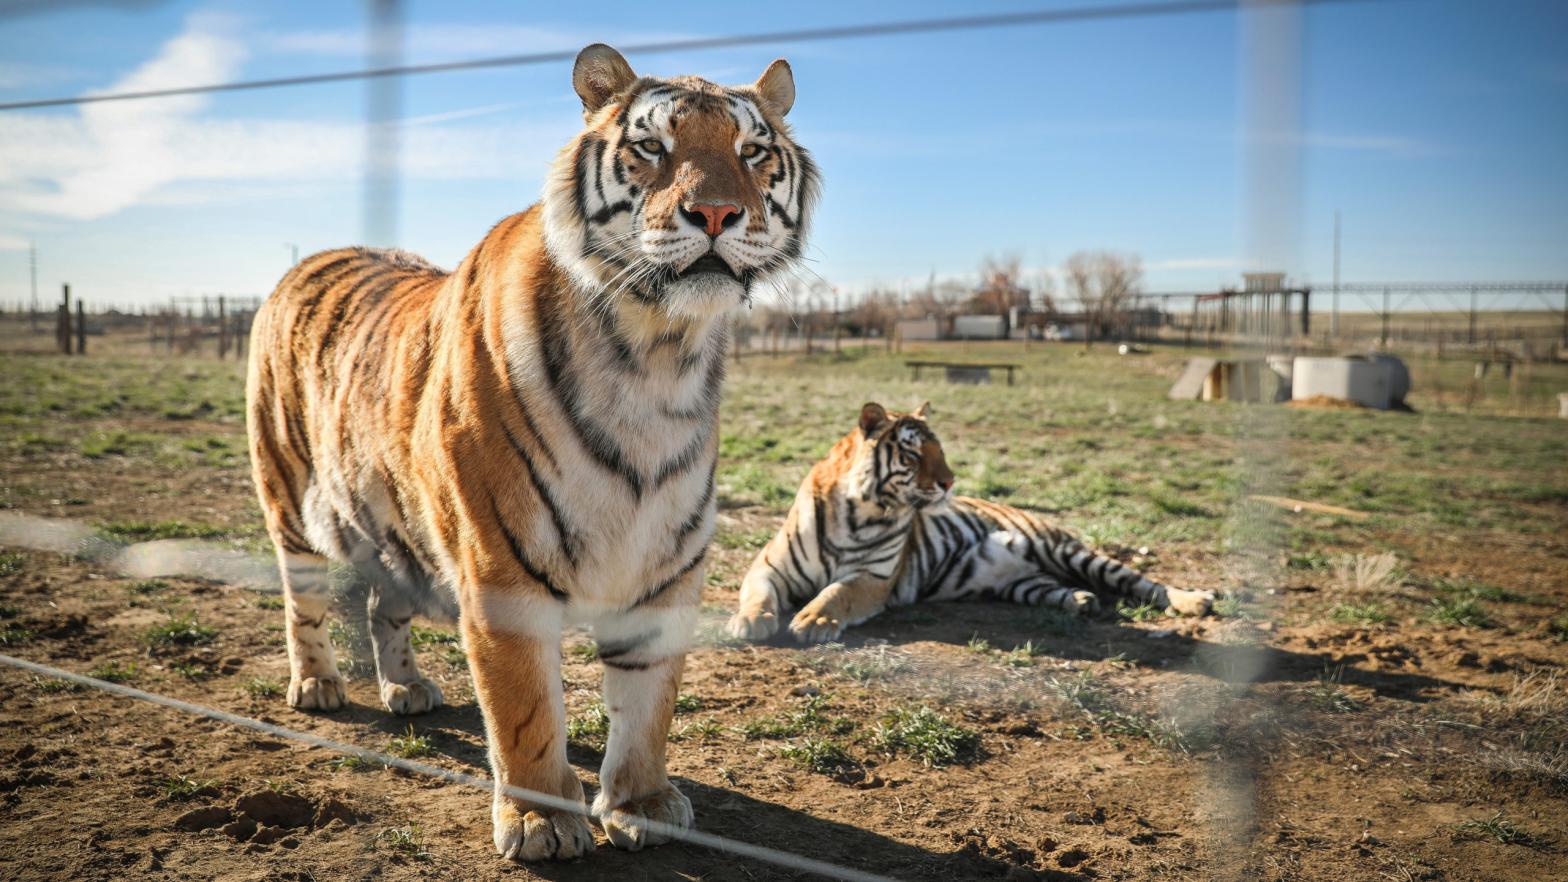 Two of the 39 tigers that were rescued in 2017 from Joe Exotic's zoo at Wild Animal Sanctuary in Colorado. (Photo: Marc Piscotty/Getty Images)